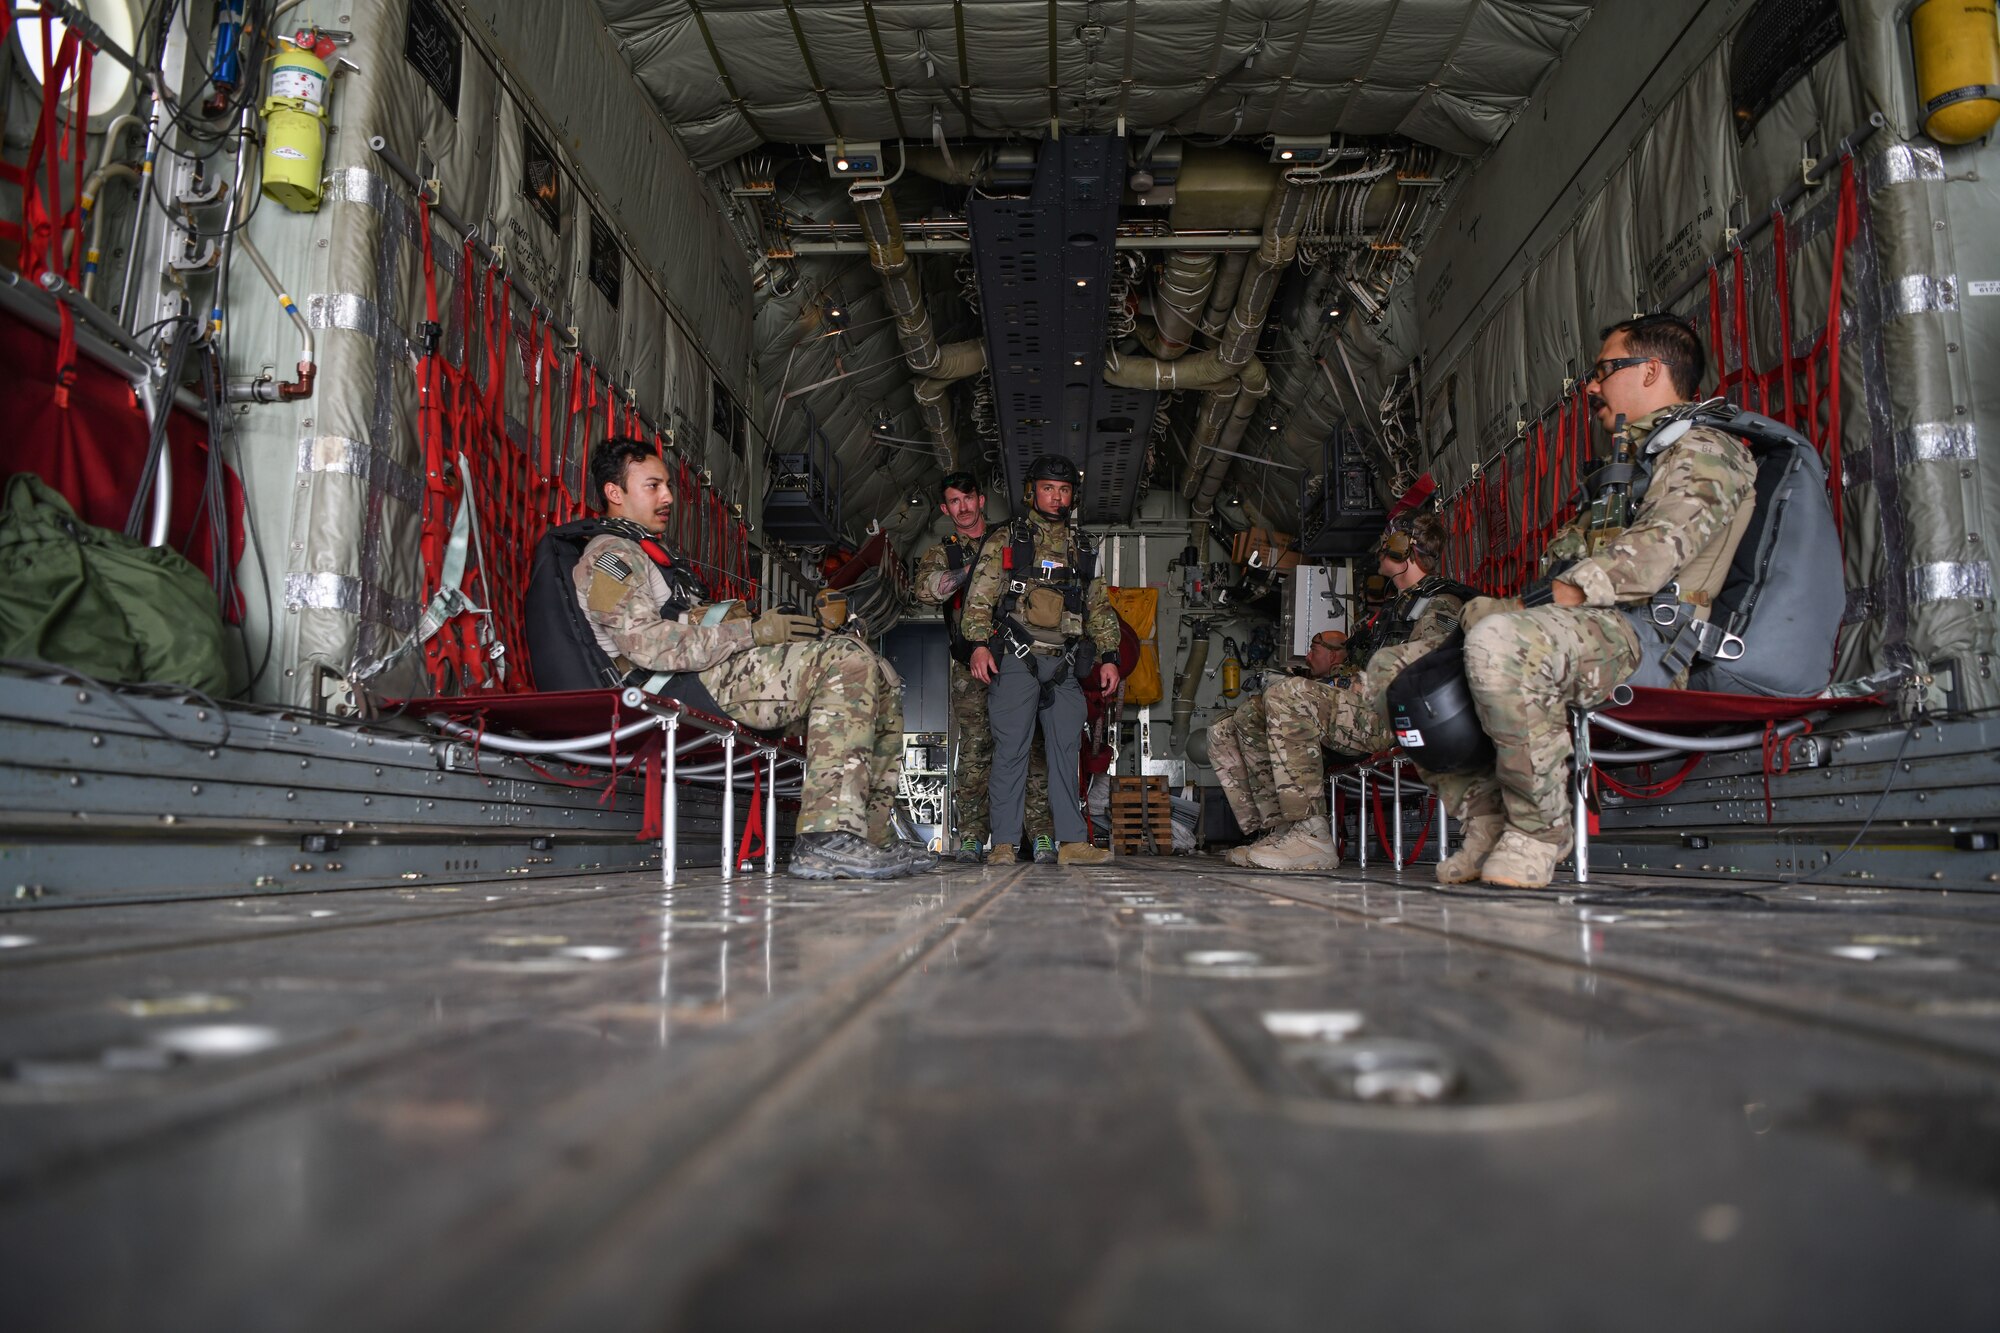 U.S. Air Force pararescuemen assigned to the 82nd Expeditionary Rescue Squadron, wait to reach altitude aboard a U.S. Marine Corps KC-130J Super Hercules before conducting jump training at Camp Lemonnier, Djibouti, Feb. 15, 2021.  The 82nd ERQS maintains jump proficiency to provide secure, reliable, flexible combat search, rescue, and recovery capabilities in support of U.S. Africa Command in North and East Africa. The 82nd ERQS serves as U.S. Air Forces Africa’s personnel recovery liaison, coordinating efforts between coalition and joint forces in East Africa and enhancing the combatant command’s Warfighter Recovery Network. (U.S. Air Force photo by Senior Airman Ericka A. Woolever)